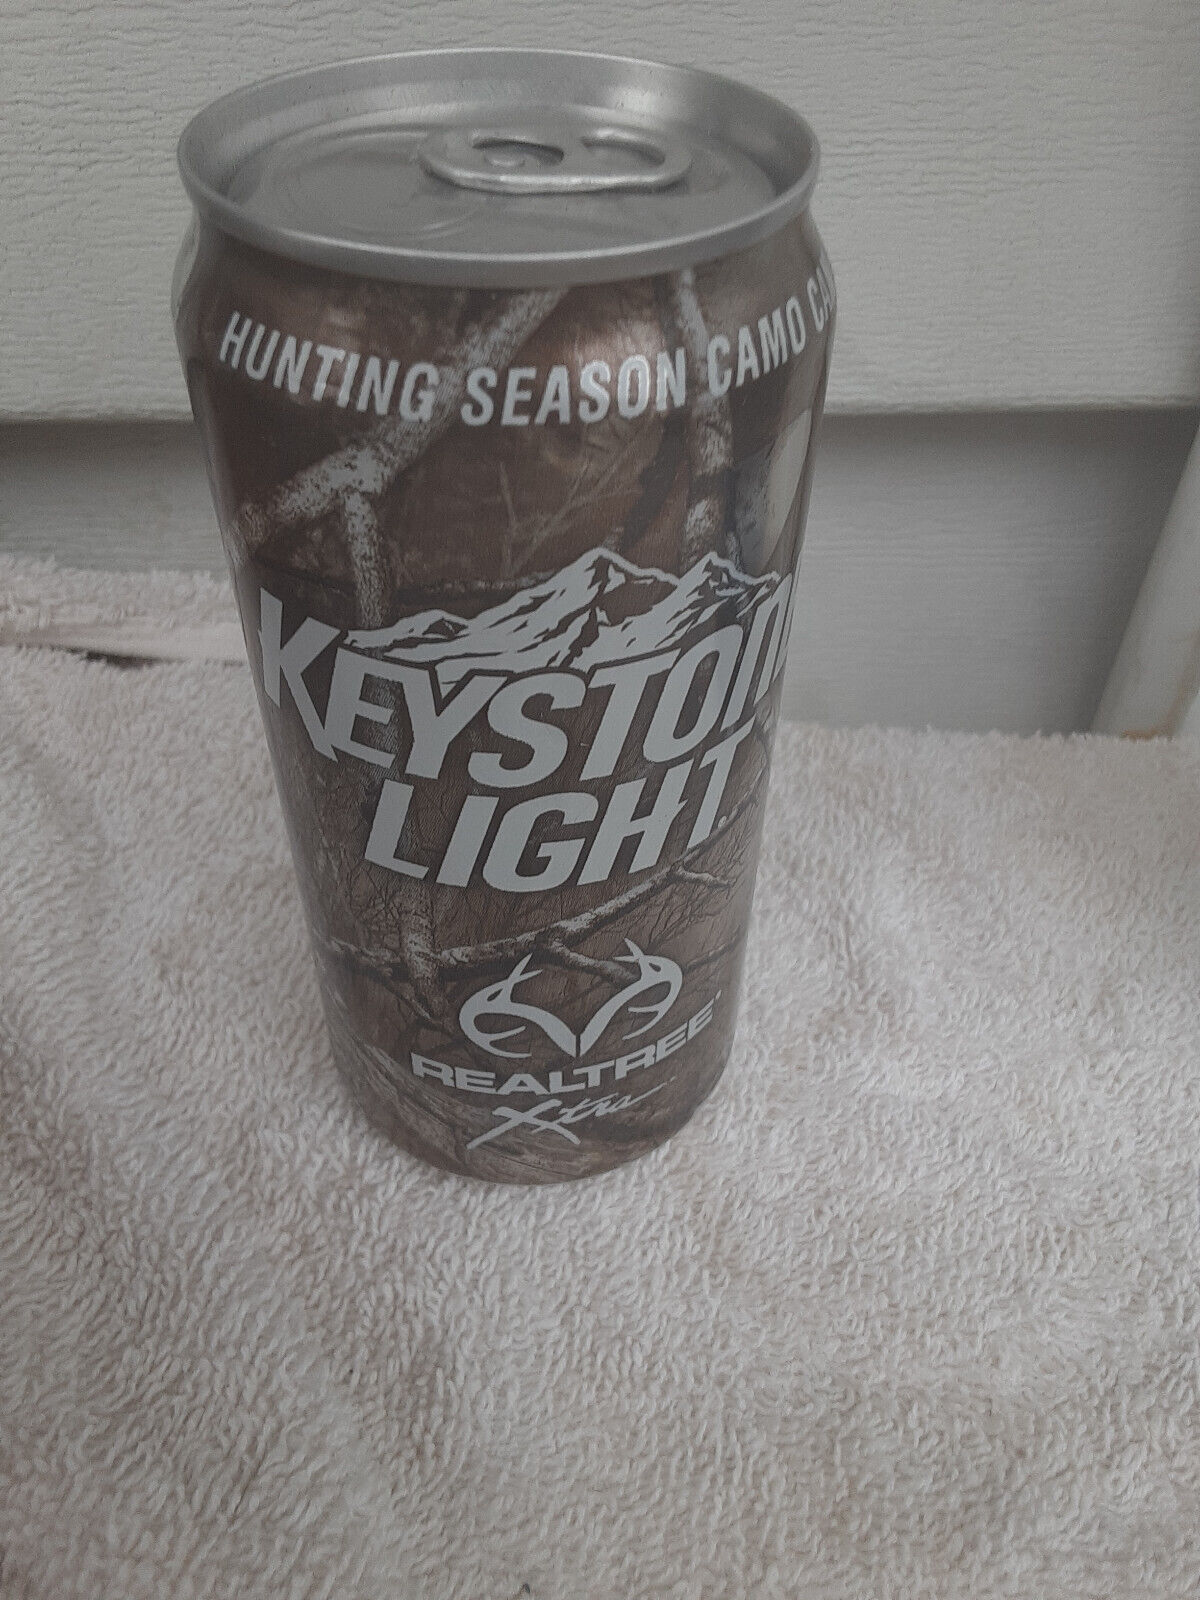 KEYSTONE LIGHT 2012 HUNTING CAMO ALUMINUM  CHEAP  BEER CAN CANS EMPTY  DOW